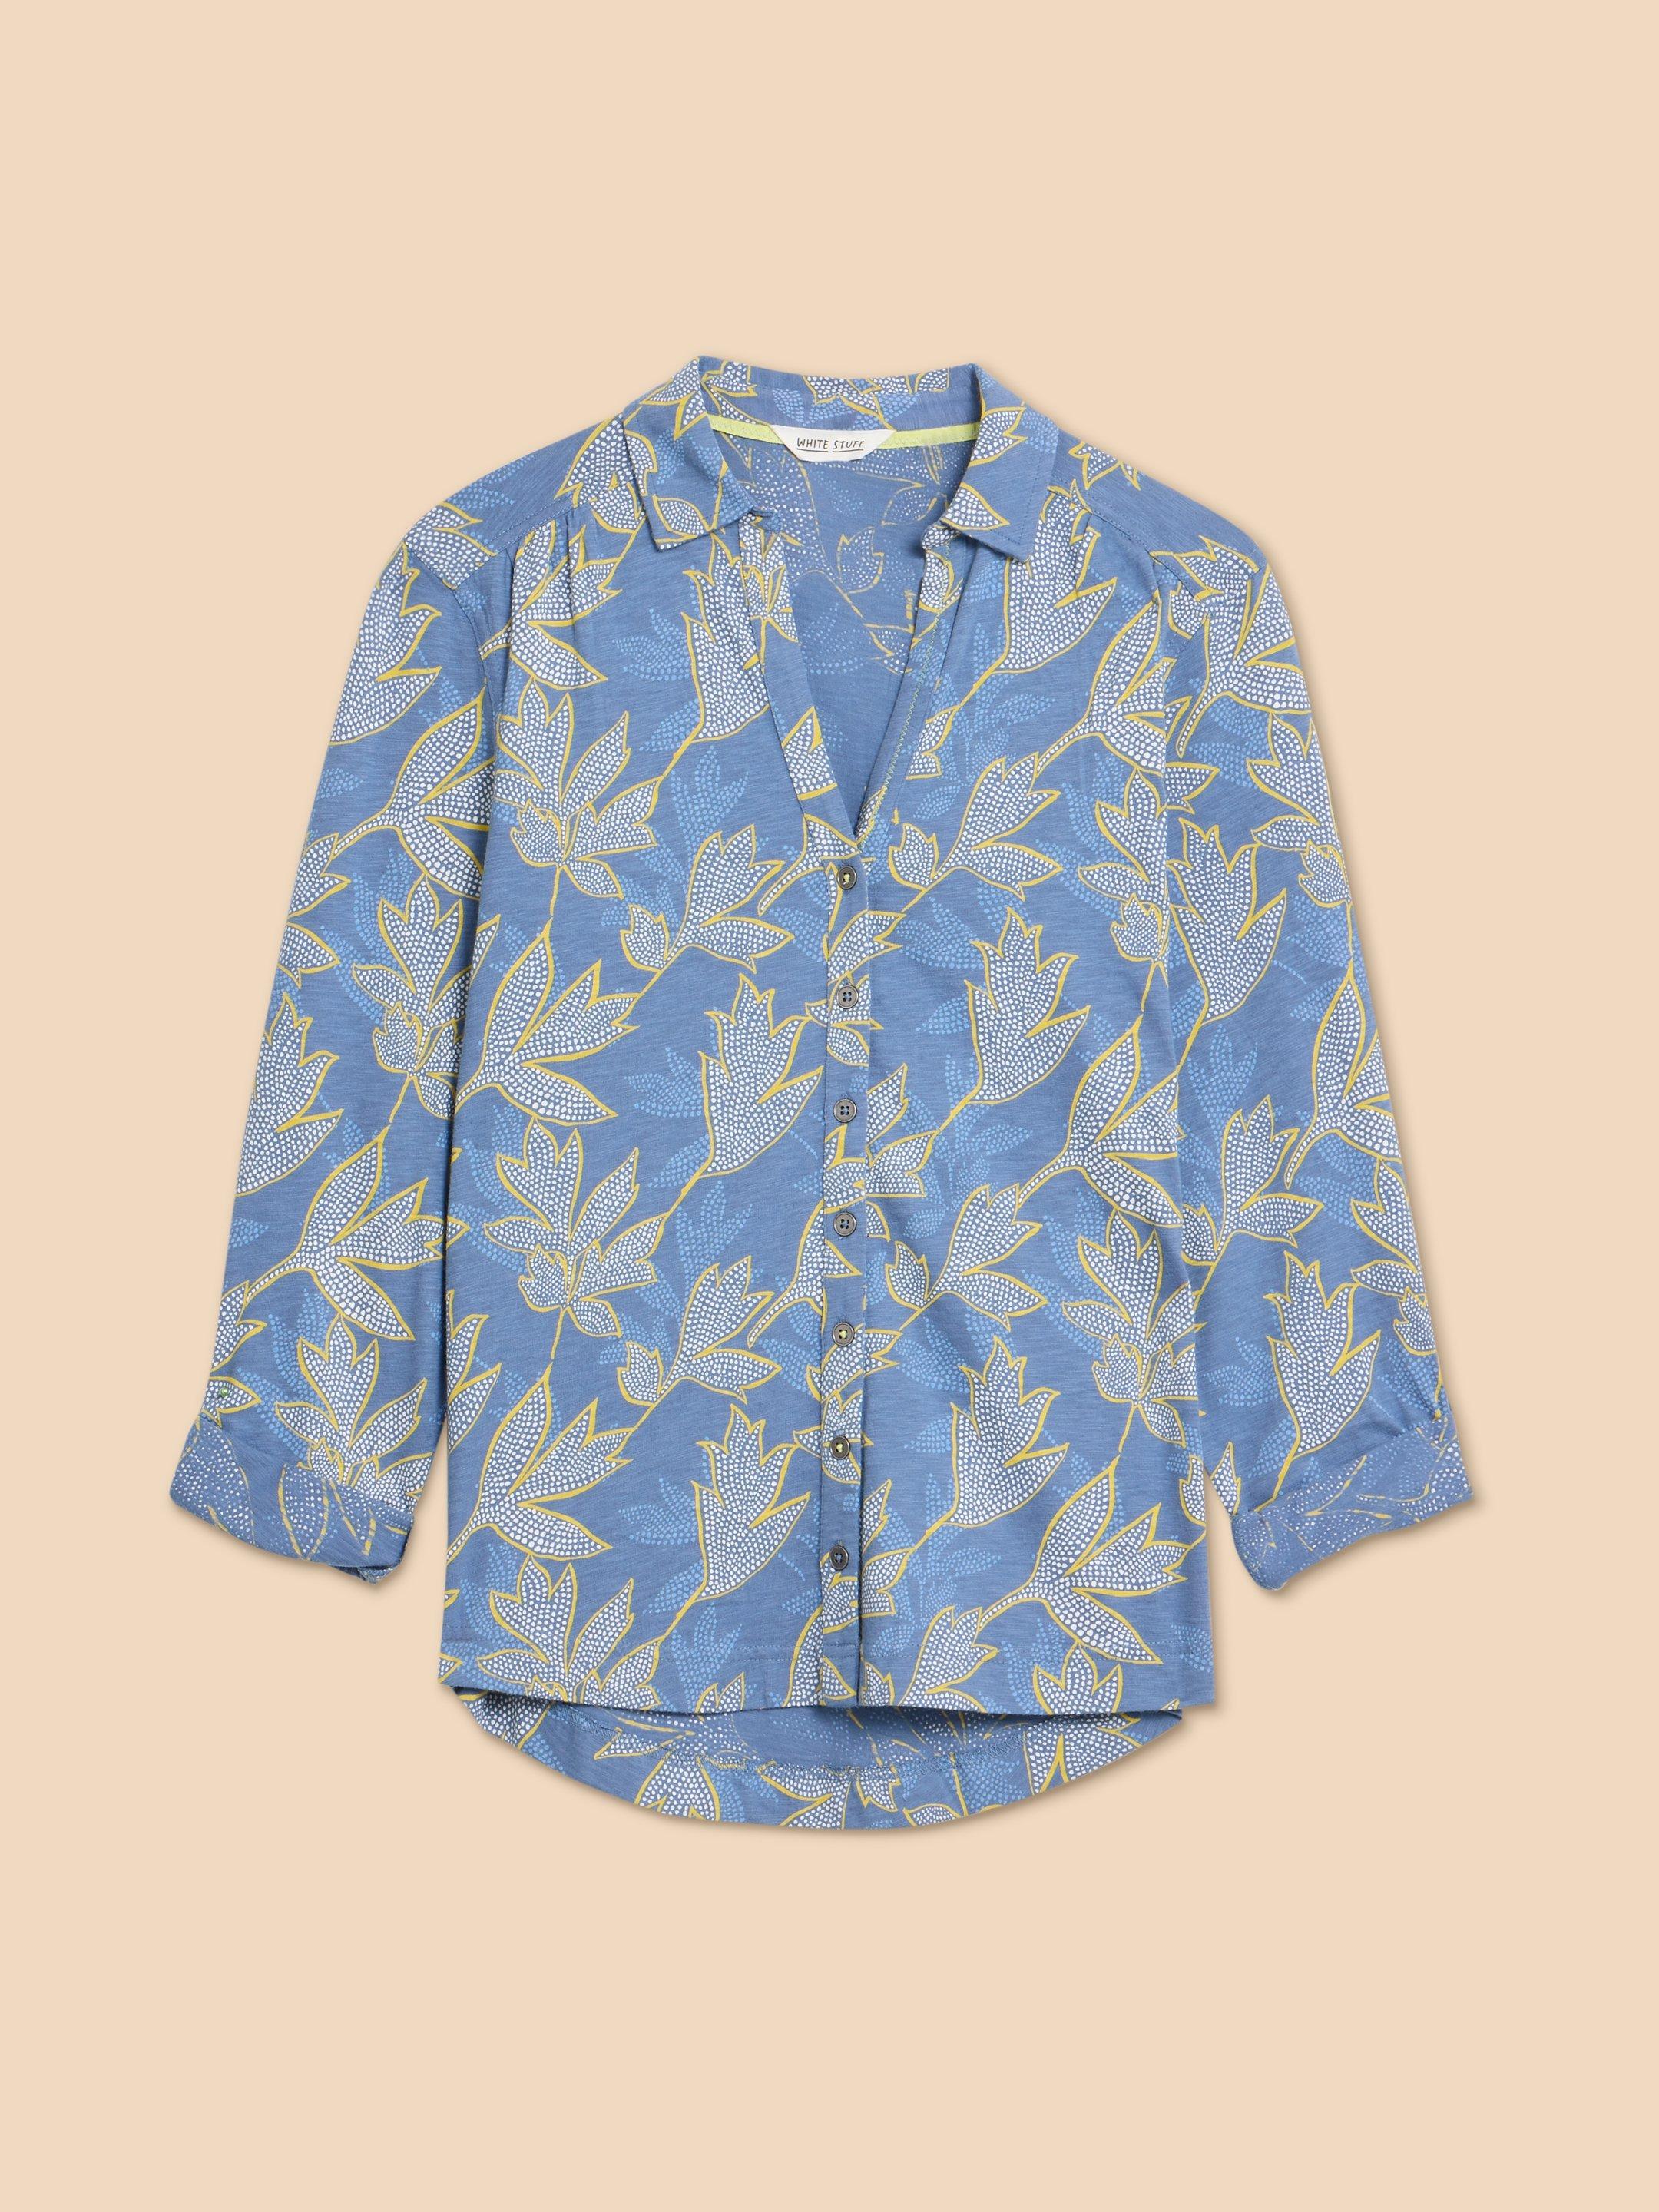 ANNIE PRINTED COTTON SHIRT in BLUE MLT - FLAT FRONT